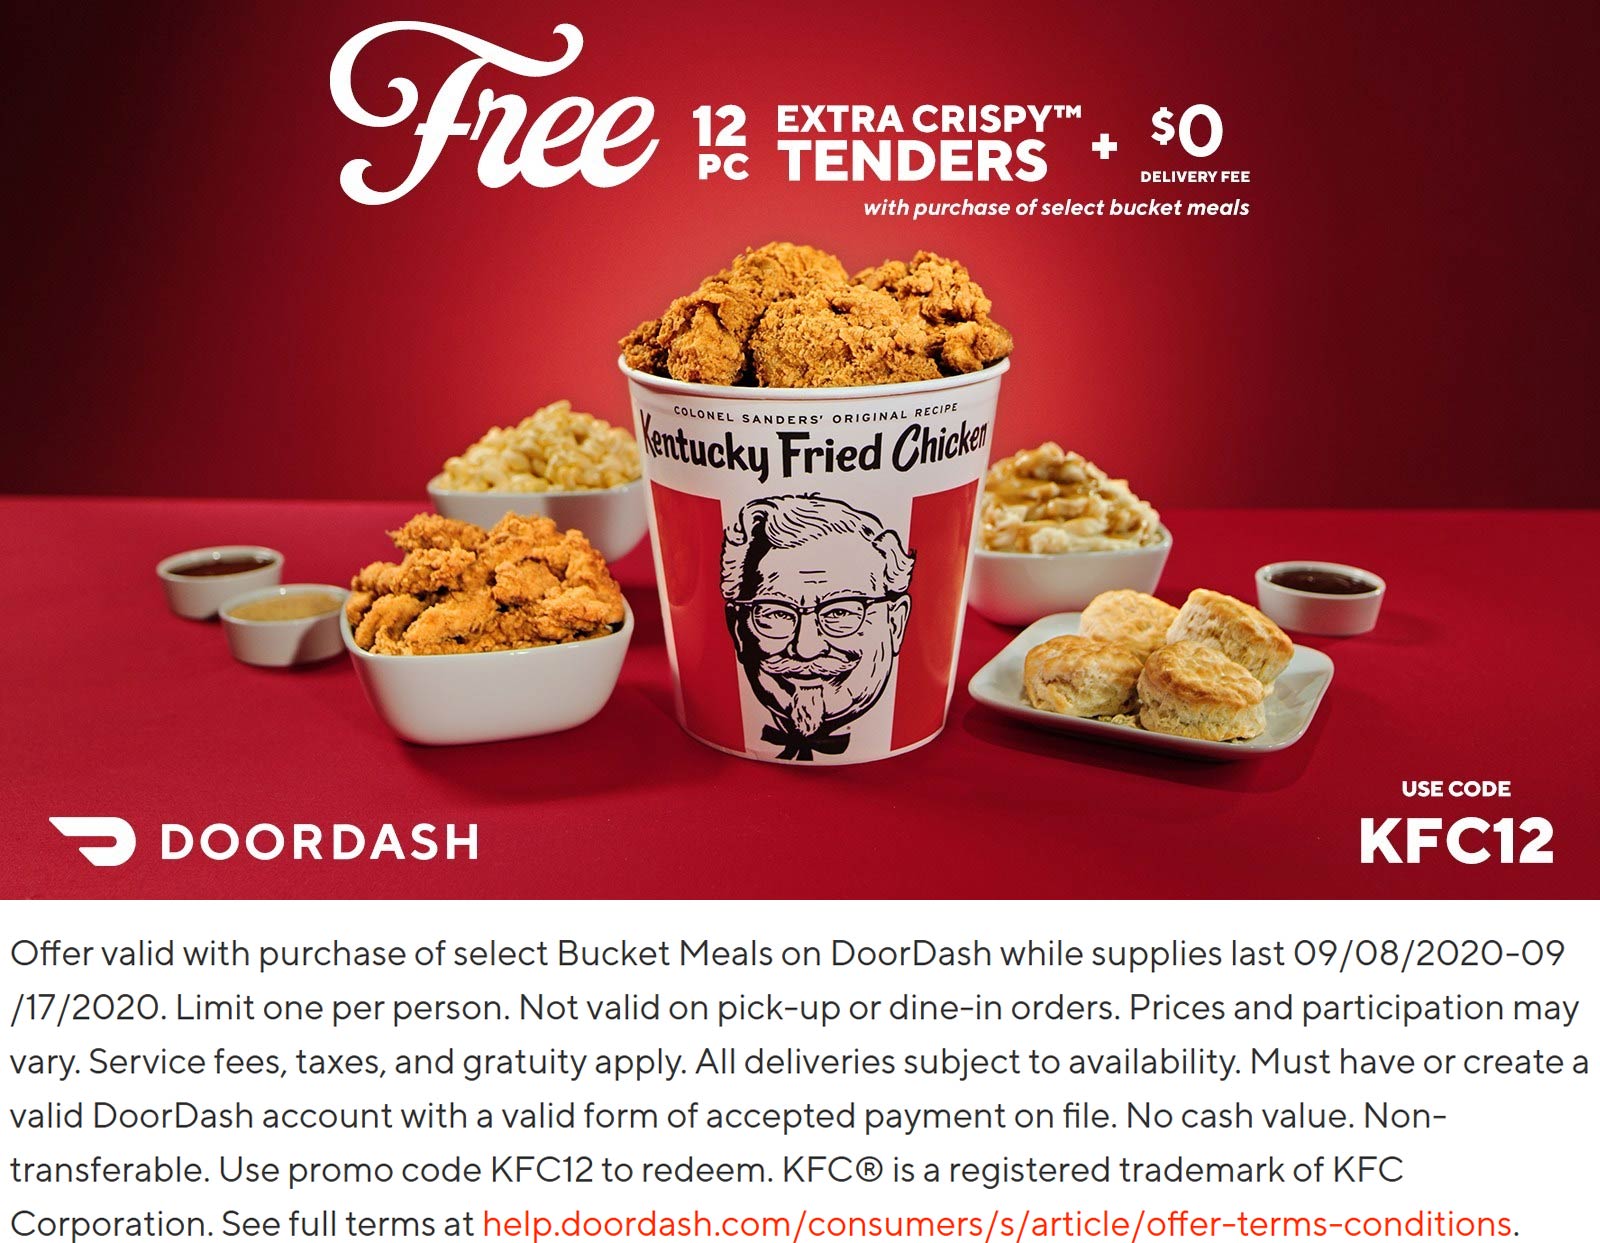 december 2020 free 12pc crispy chicken tenders with